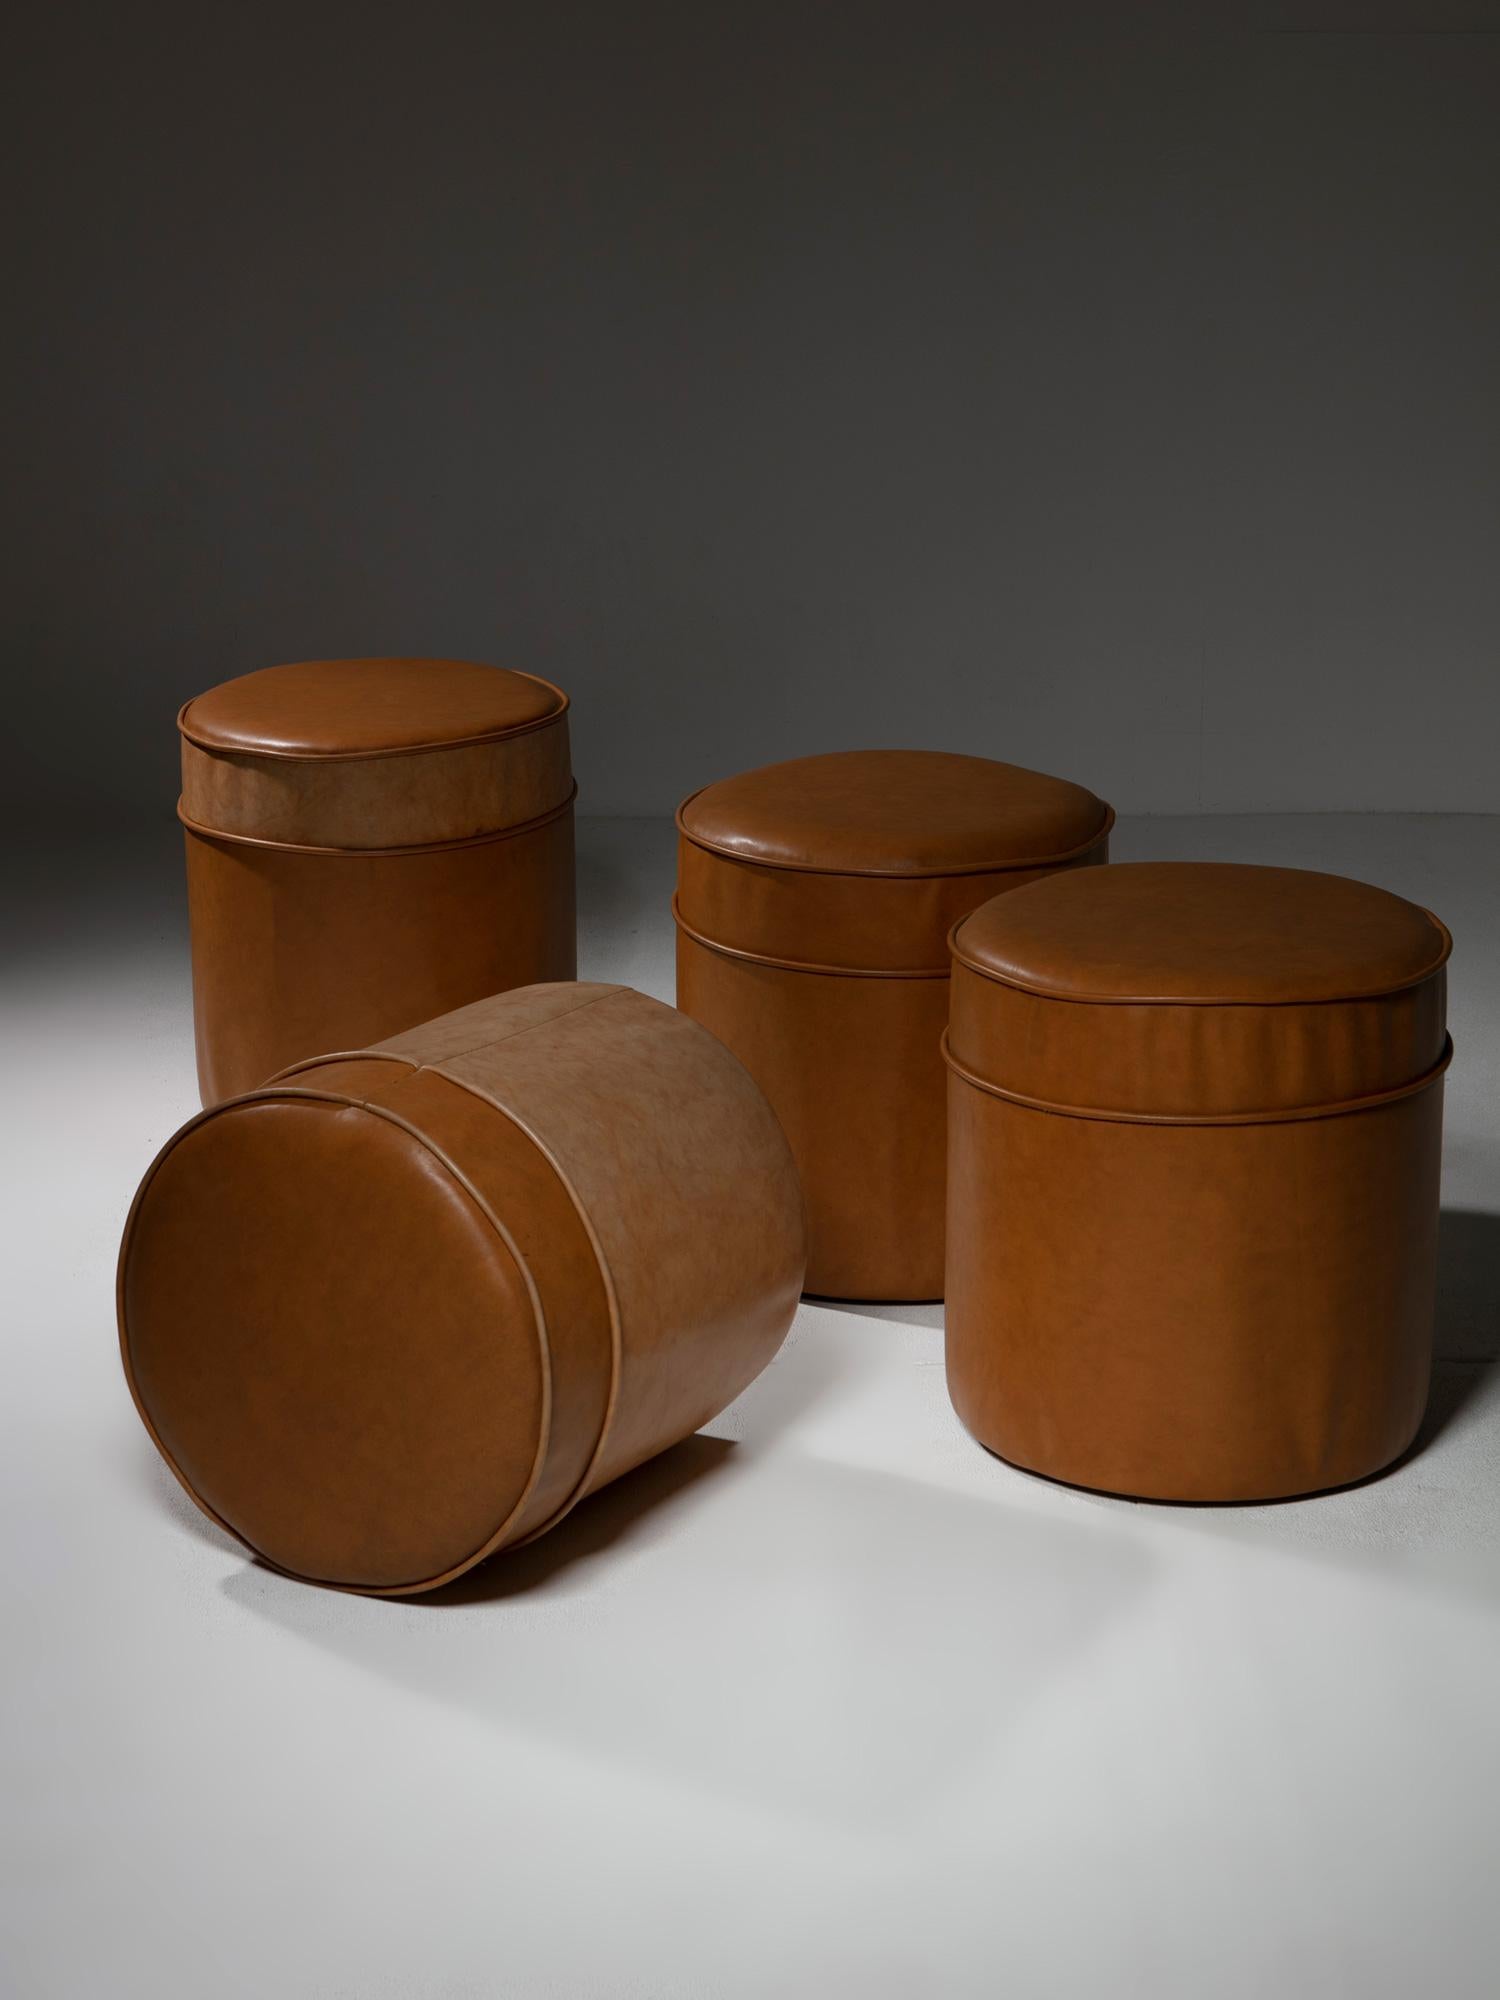 Italian Set of Four Round Leather Stools, Italy, 1970s For Sale